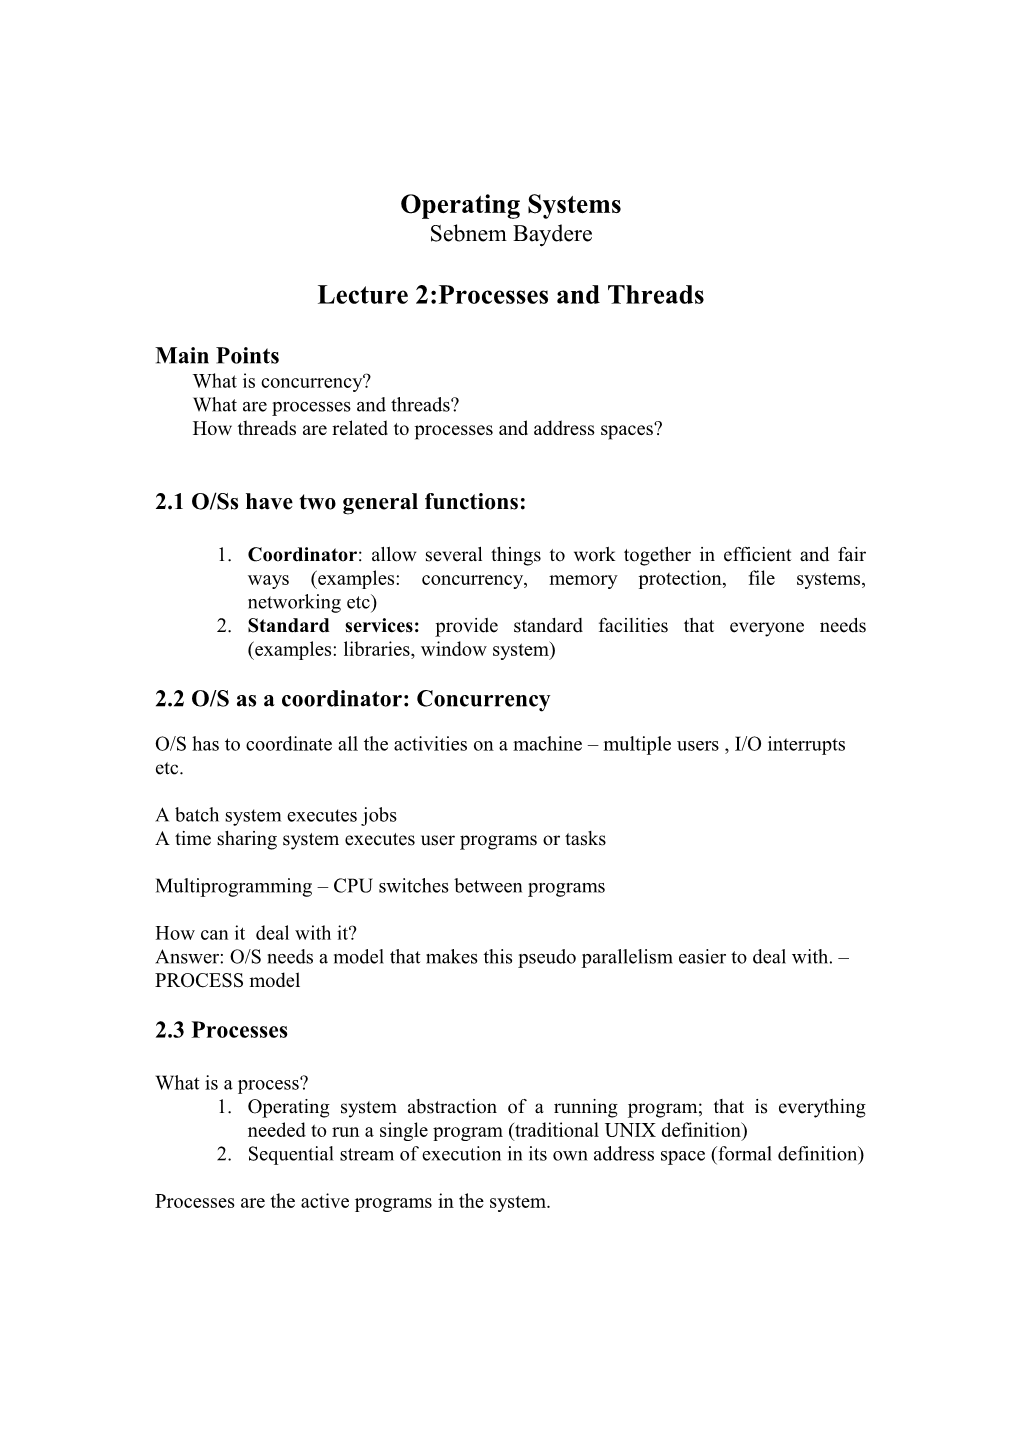 Lecture 2:Processes and Threads